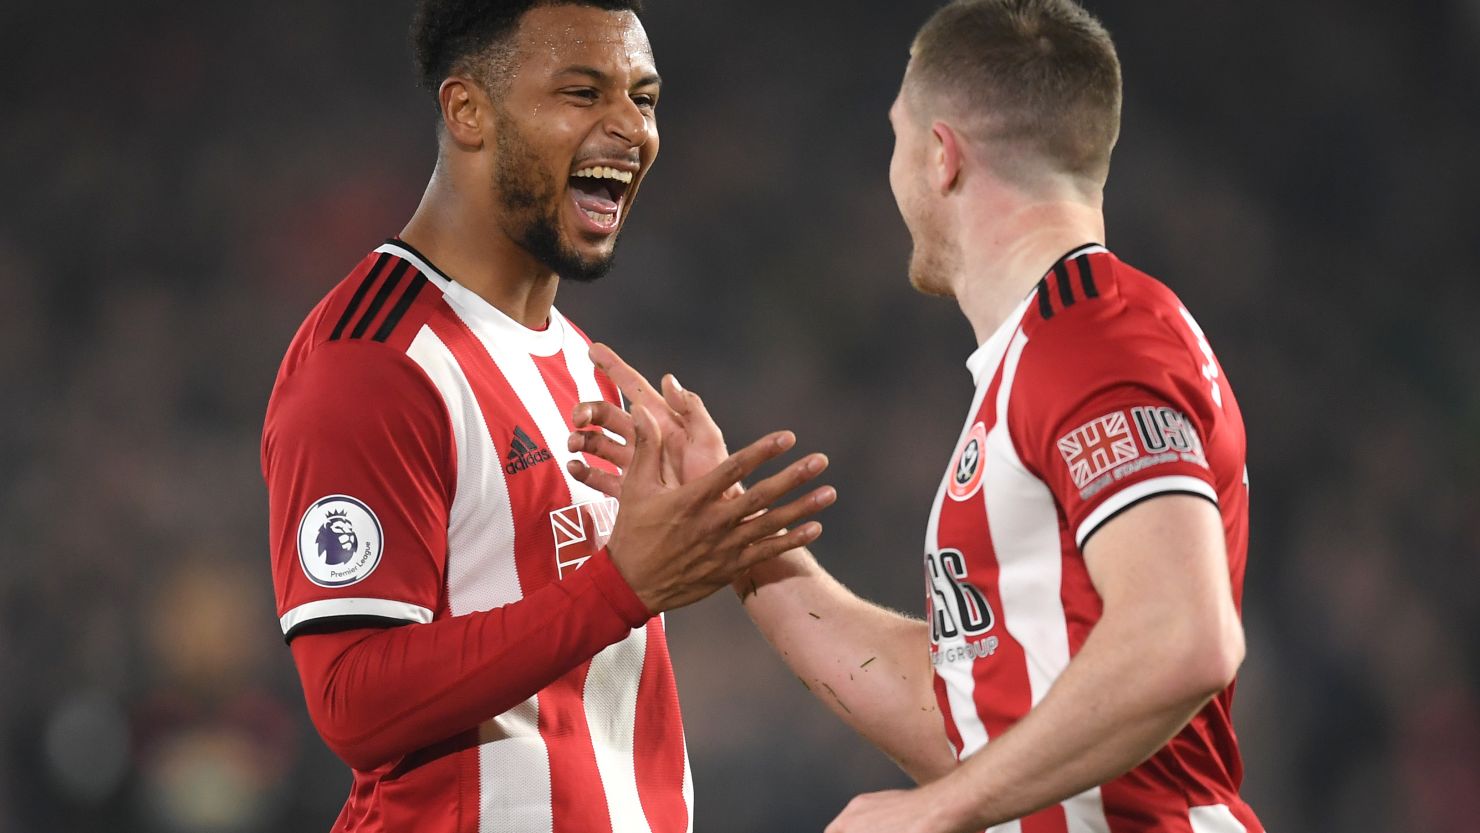 Lys Mousset celebrates with John Lundstram after scoring Sheffield United's second goal.